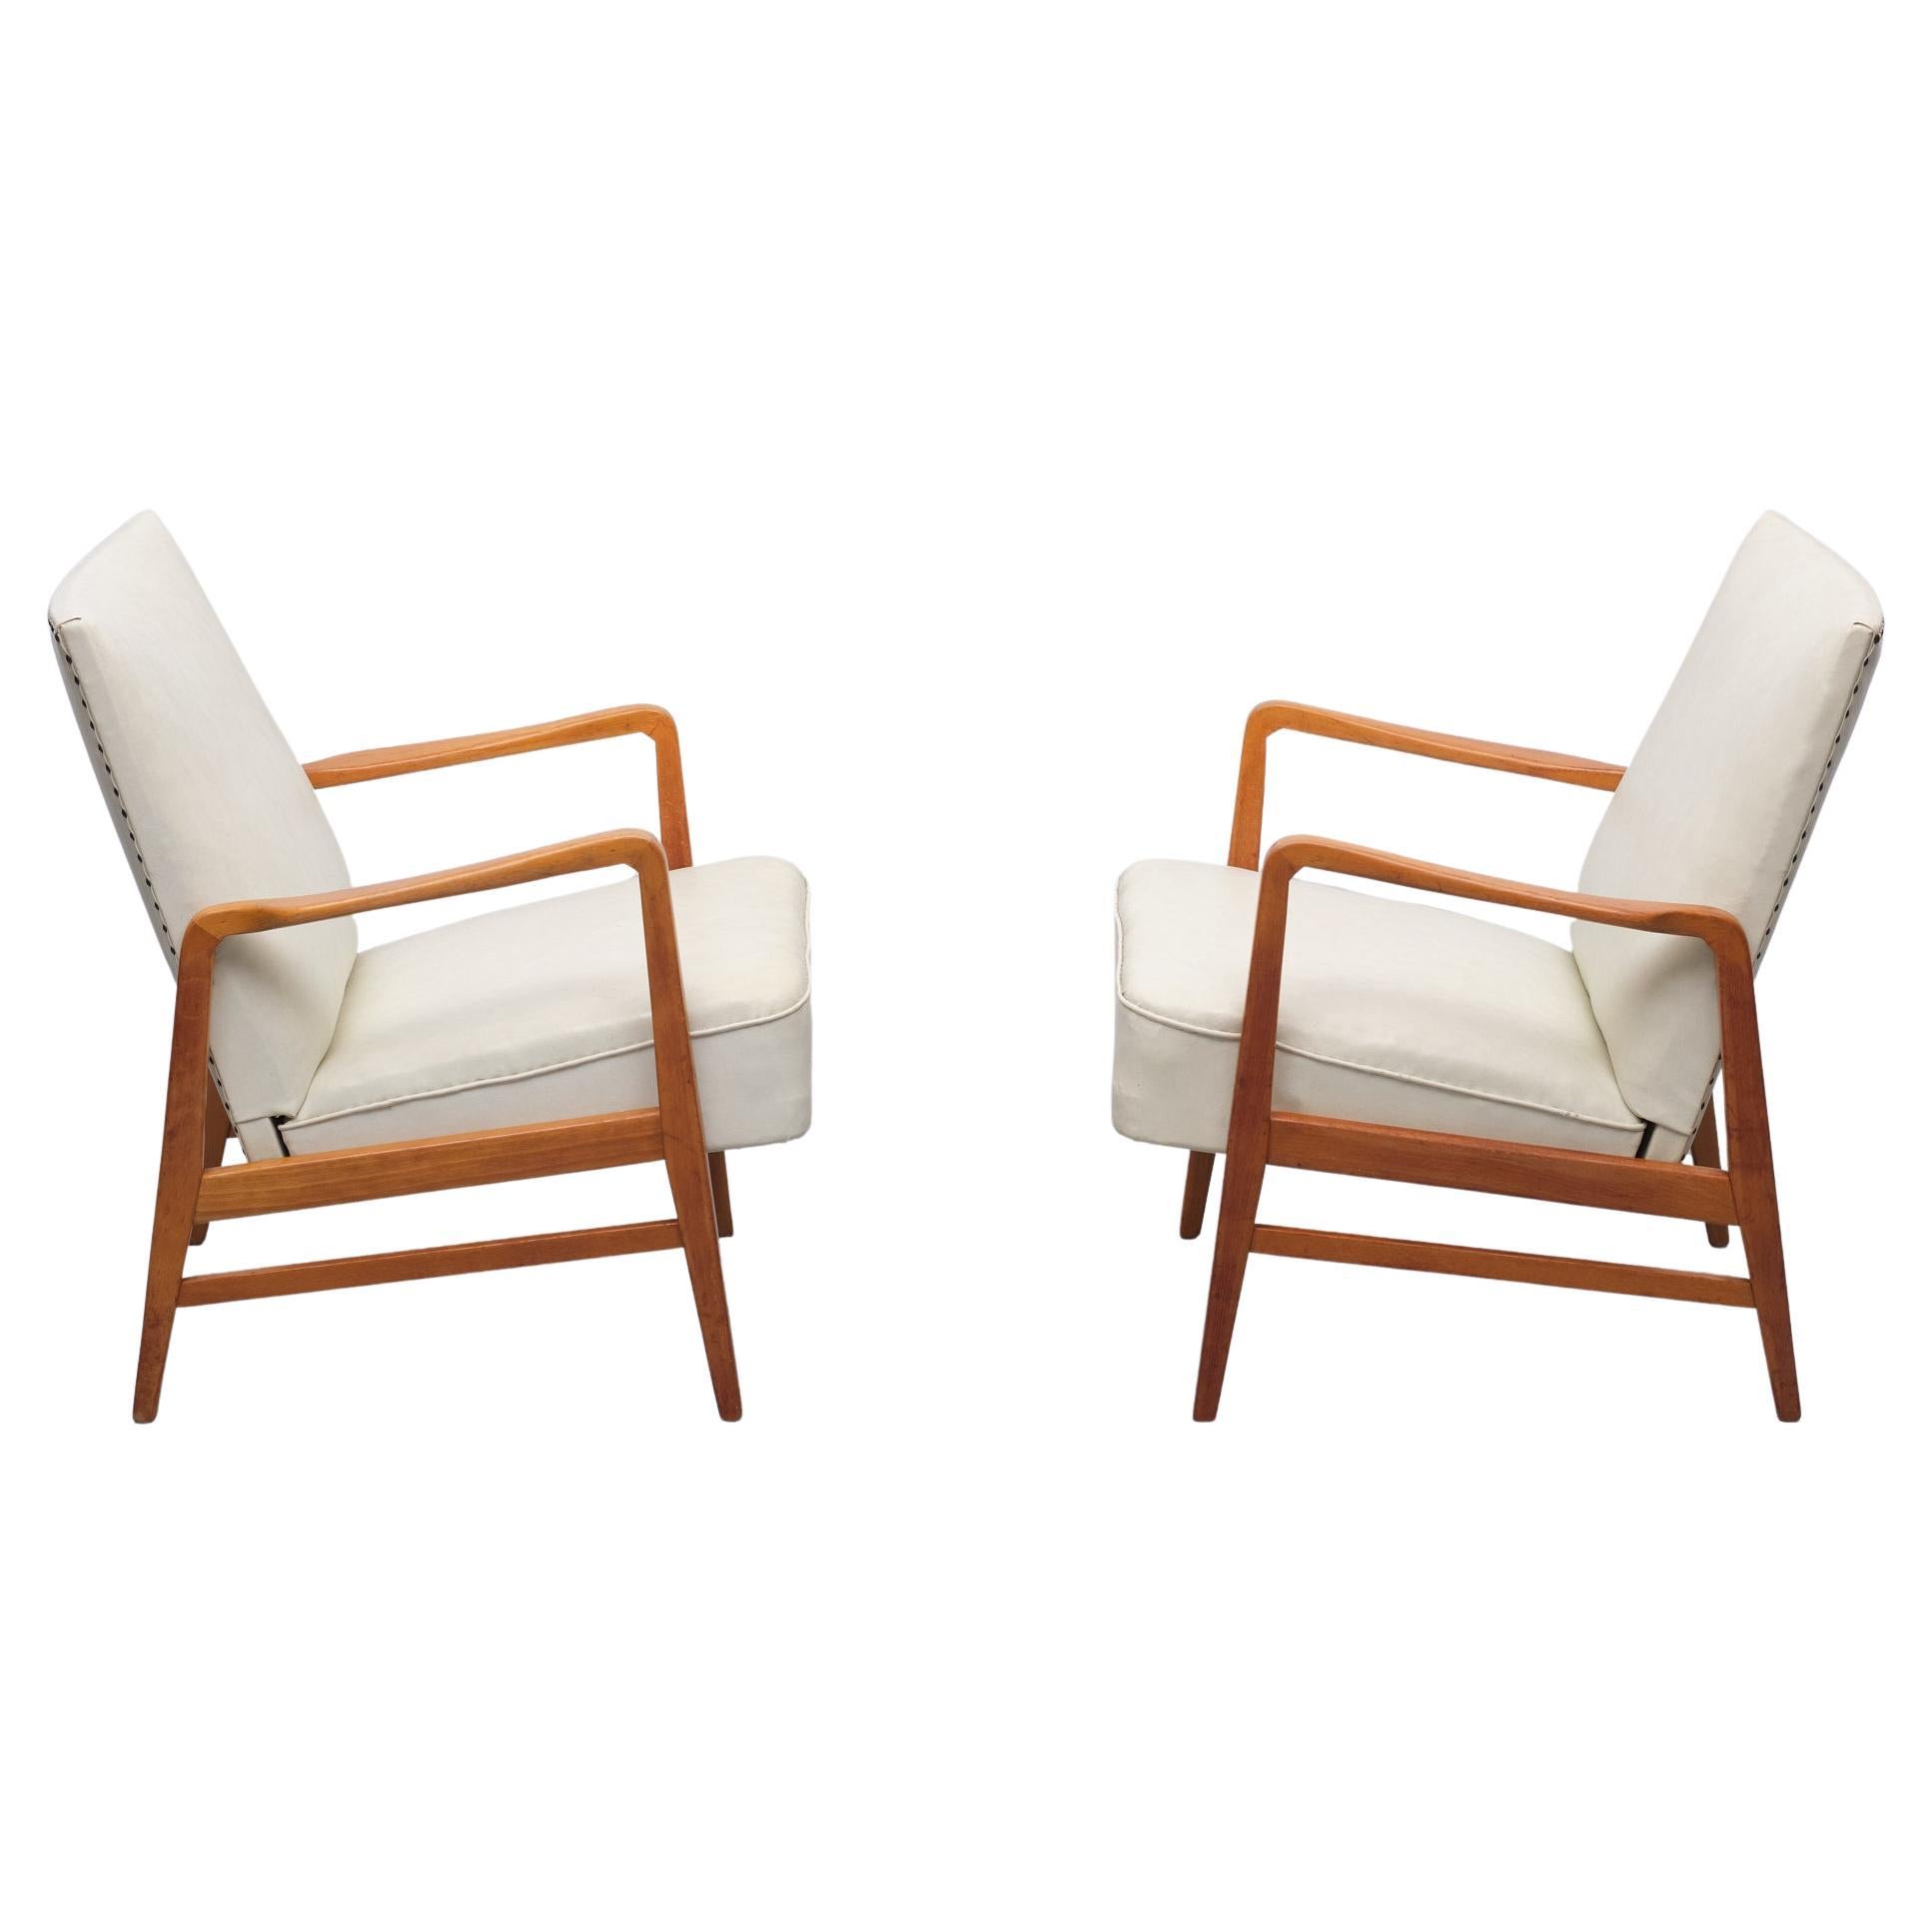 Two early versions of Dux armchairs, Creme color Faux Leather upholstery.
beechwood frame. Rare model. Good sitting comfort. Signed with a Aluminum
plate. Still in a good condition. normal wear and tear. All original condition.